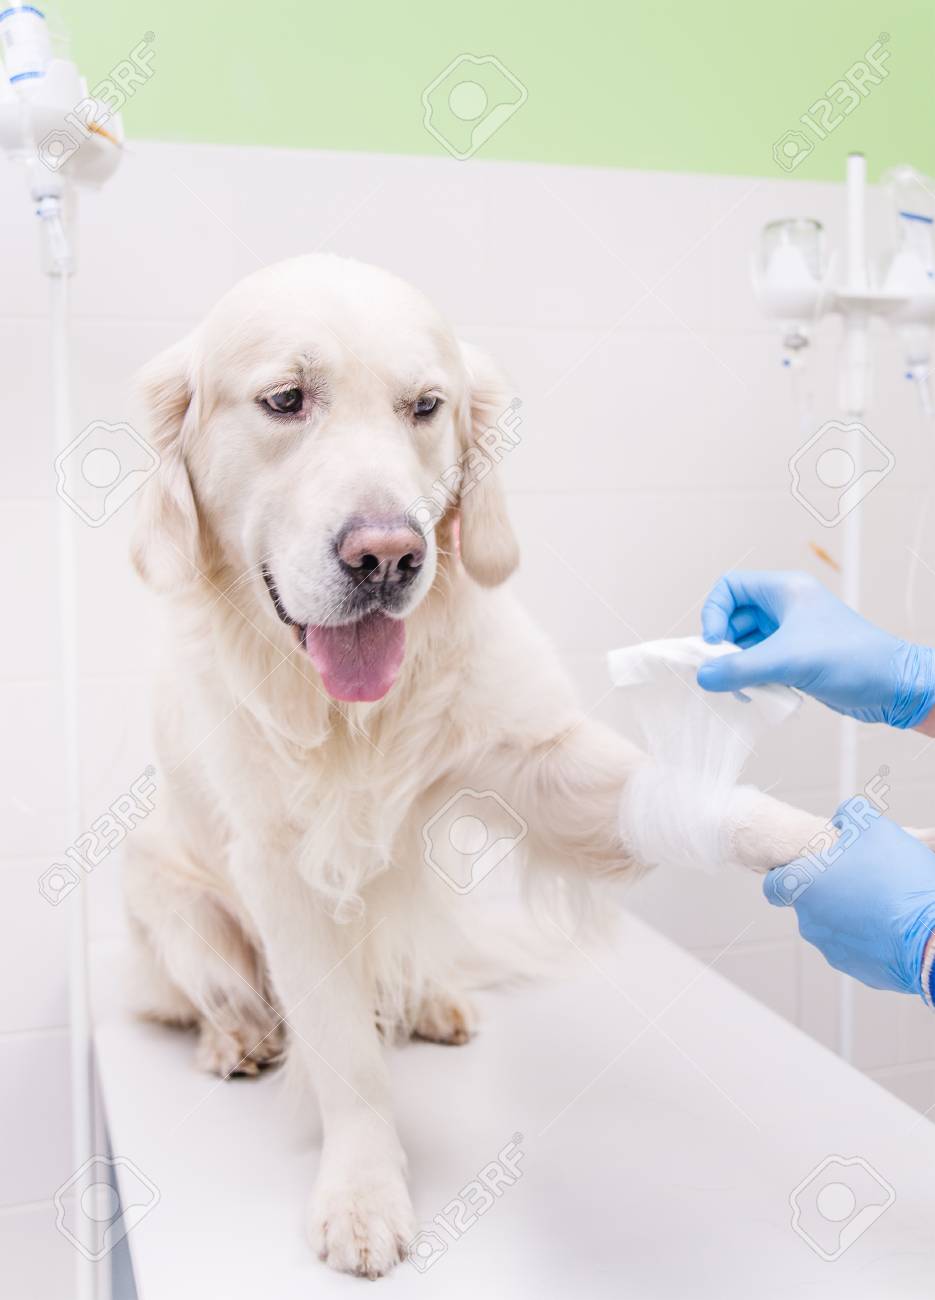 Veterinarian putting bandage on paw of golden retriever puppy at